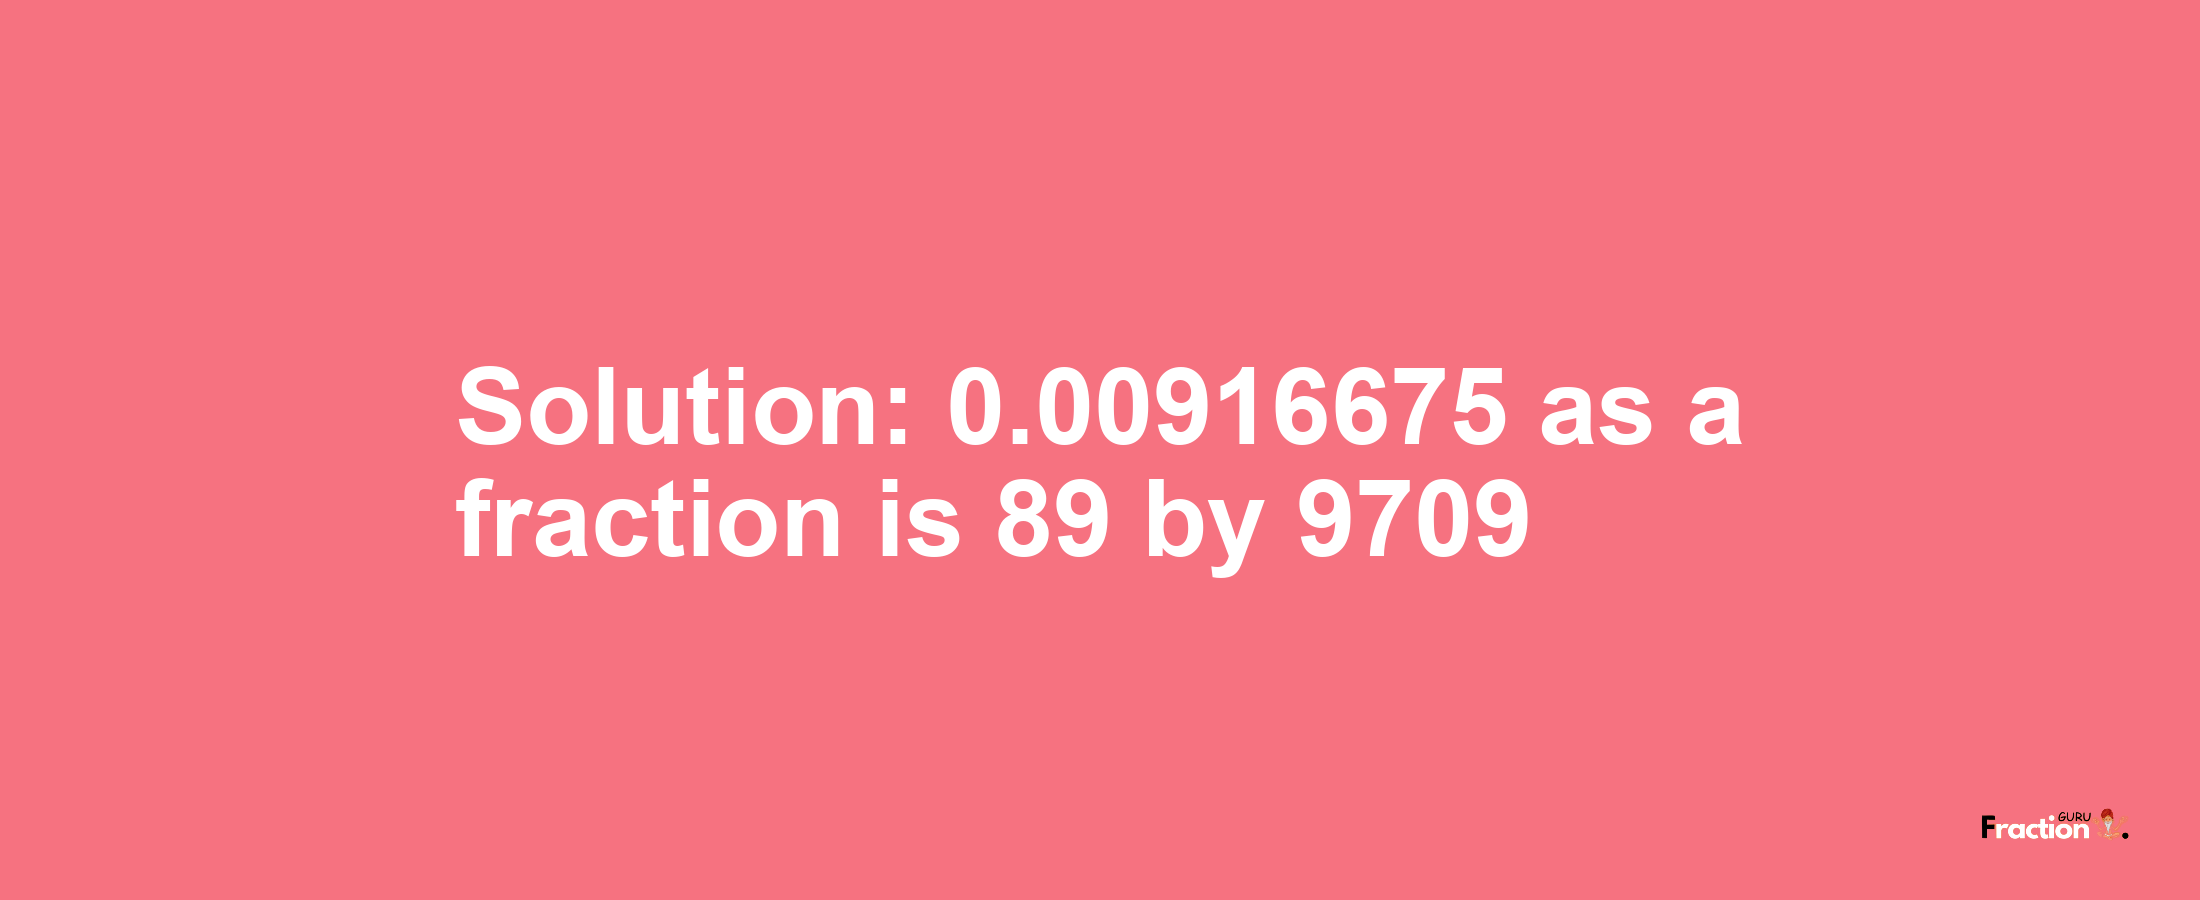 Solution:0.00916675 as a fraction is 89/9709